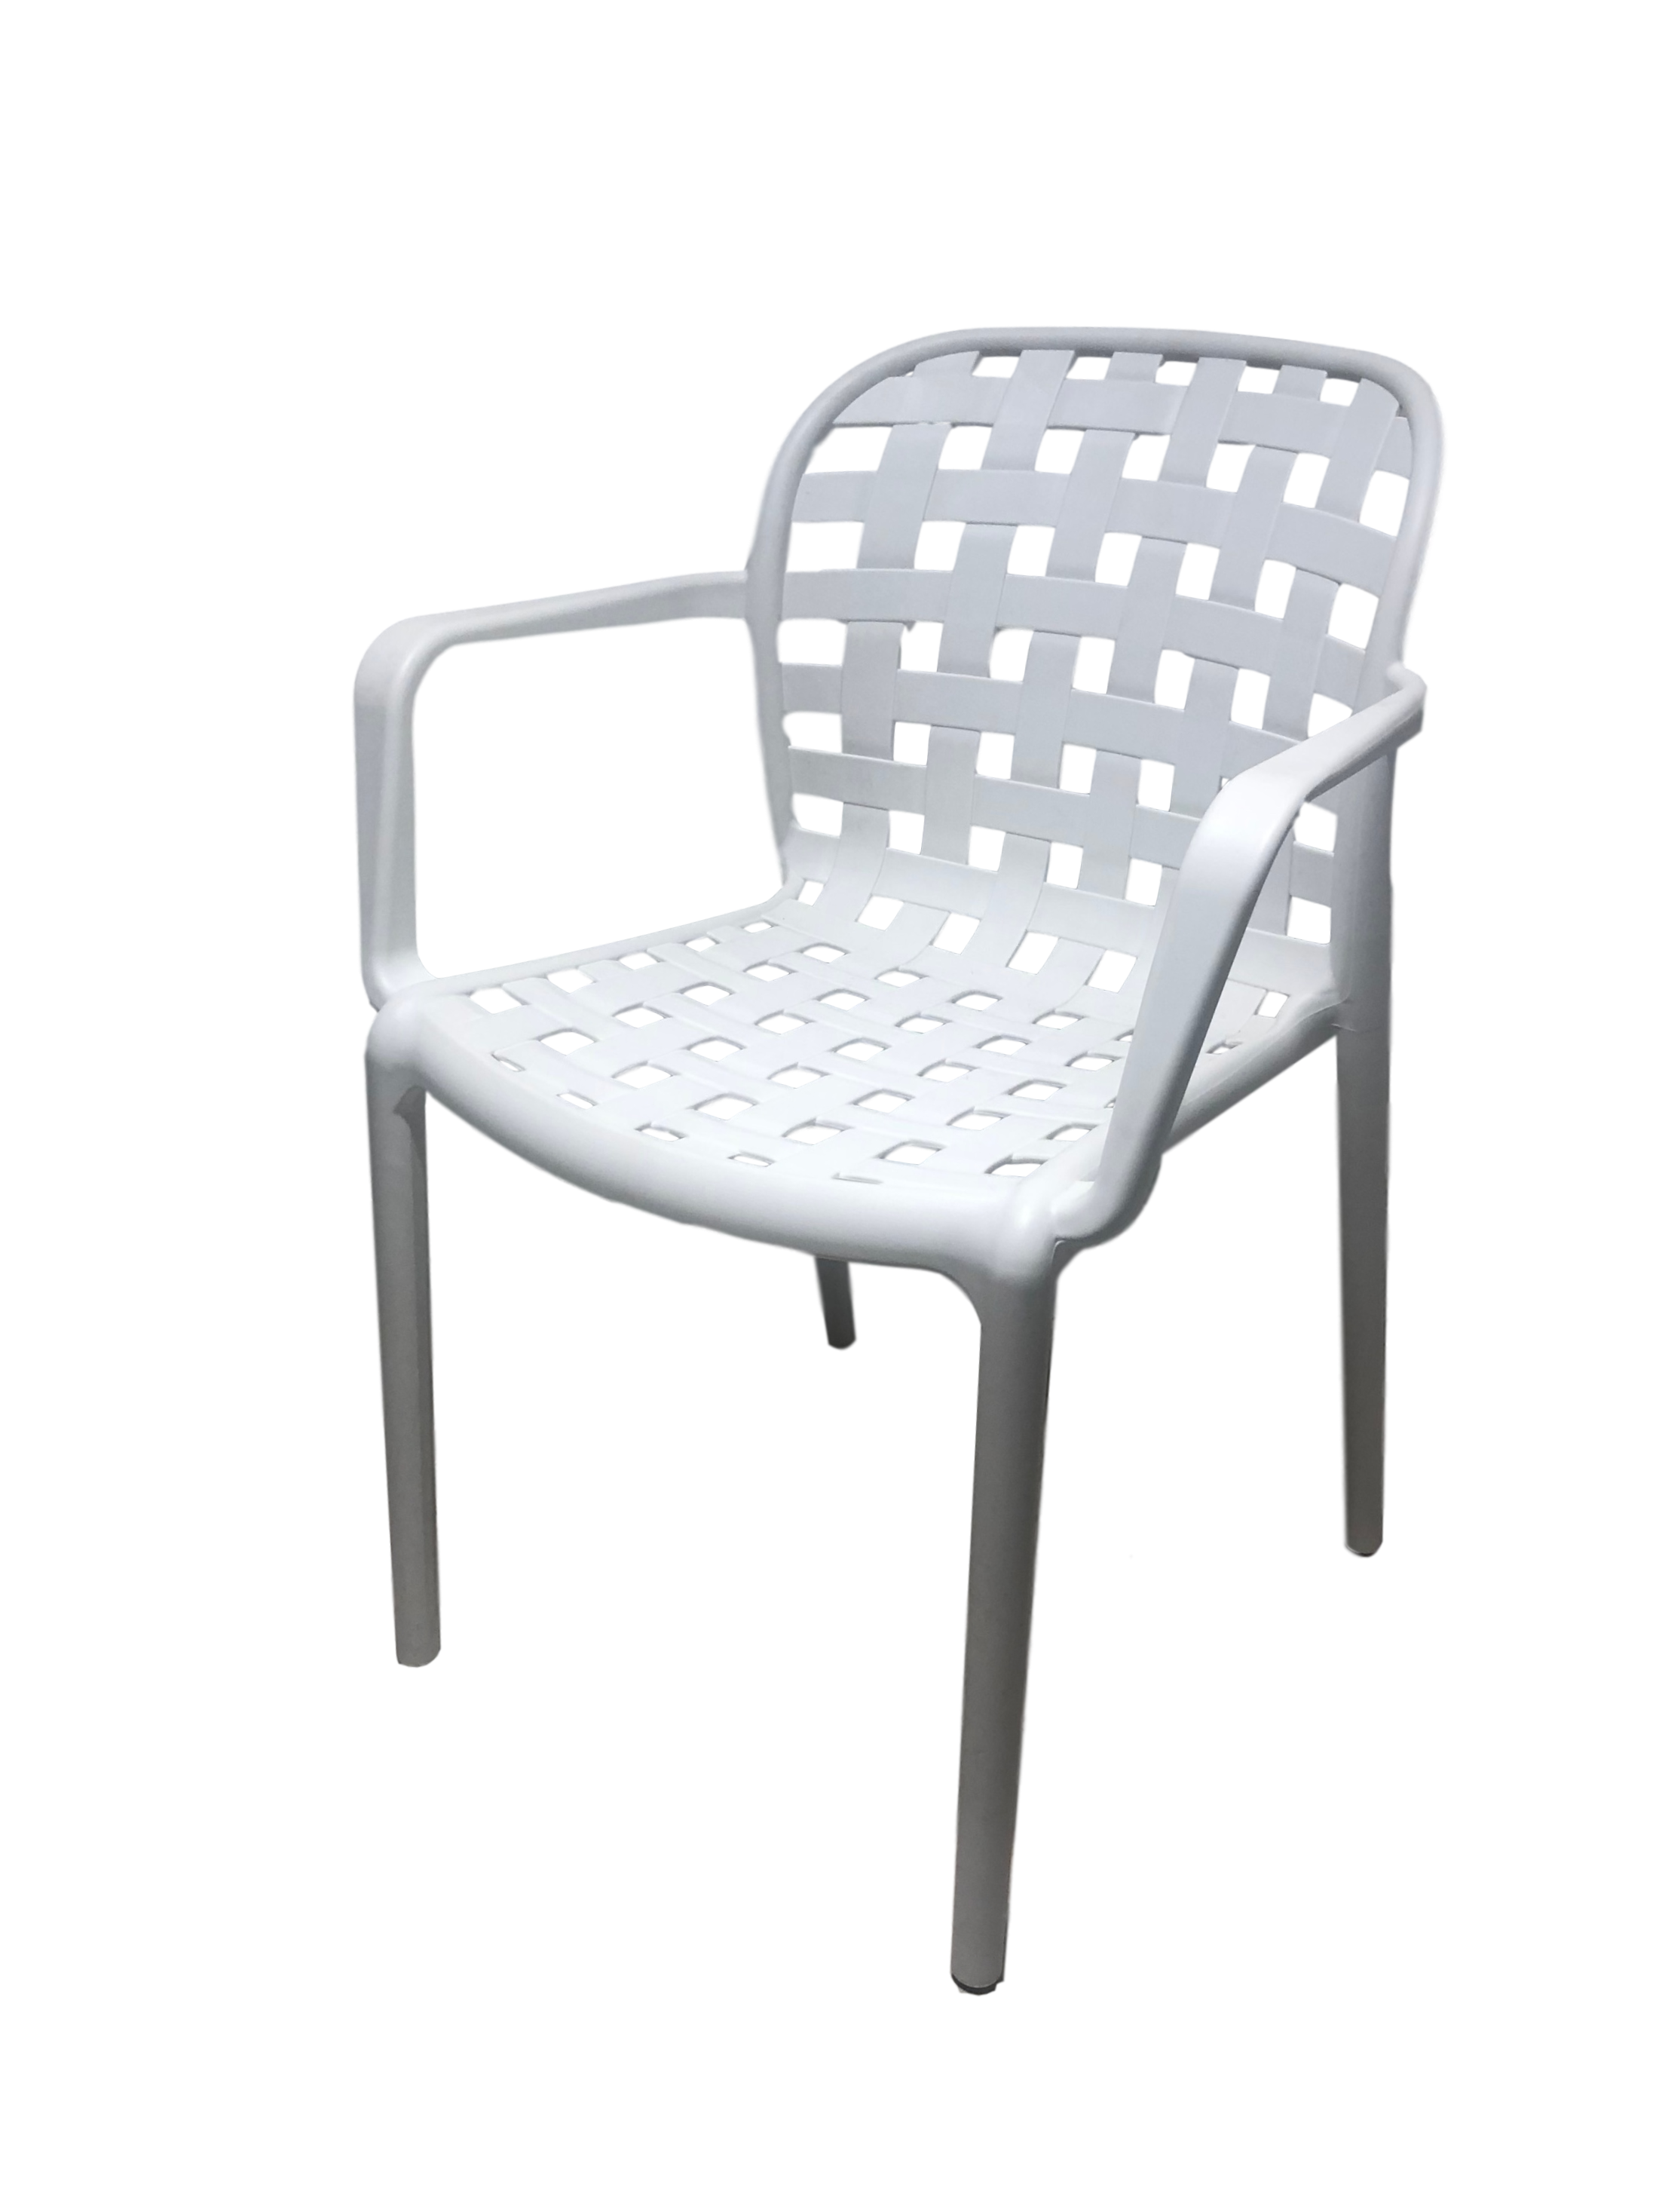 outdoor chairs stackable chairs alfresco chairs plastic